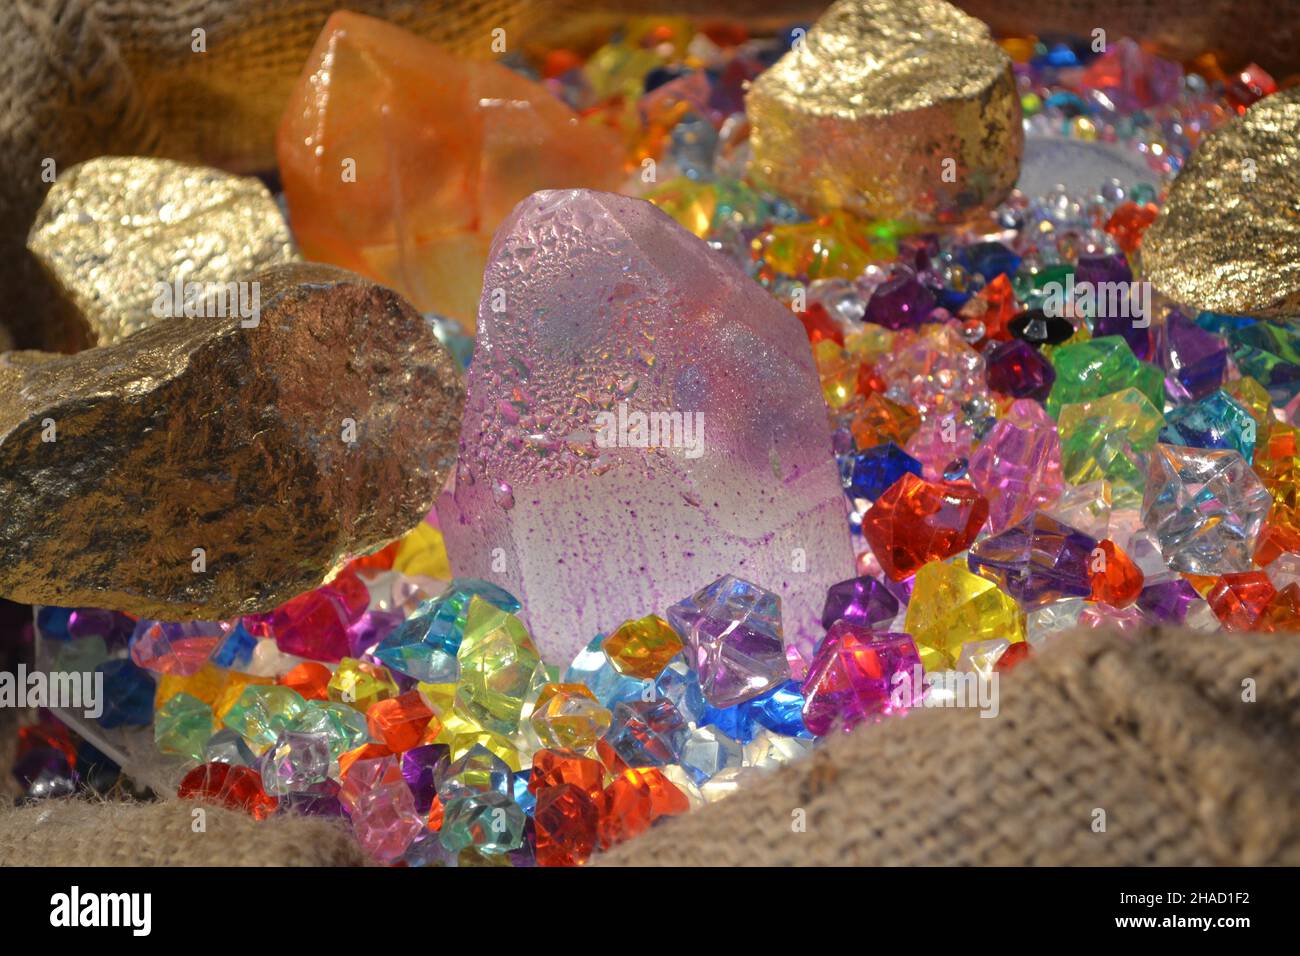 Mixed Acrylic Plastic Crystal Gems as Treasure Hunting Pirate Jewelry in Burlap Sack for Fashion Store Window Merchandising. Stock Photo